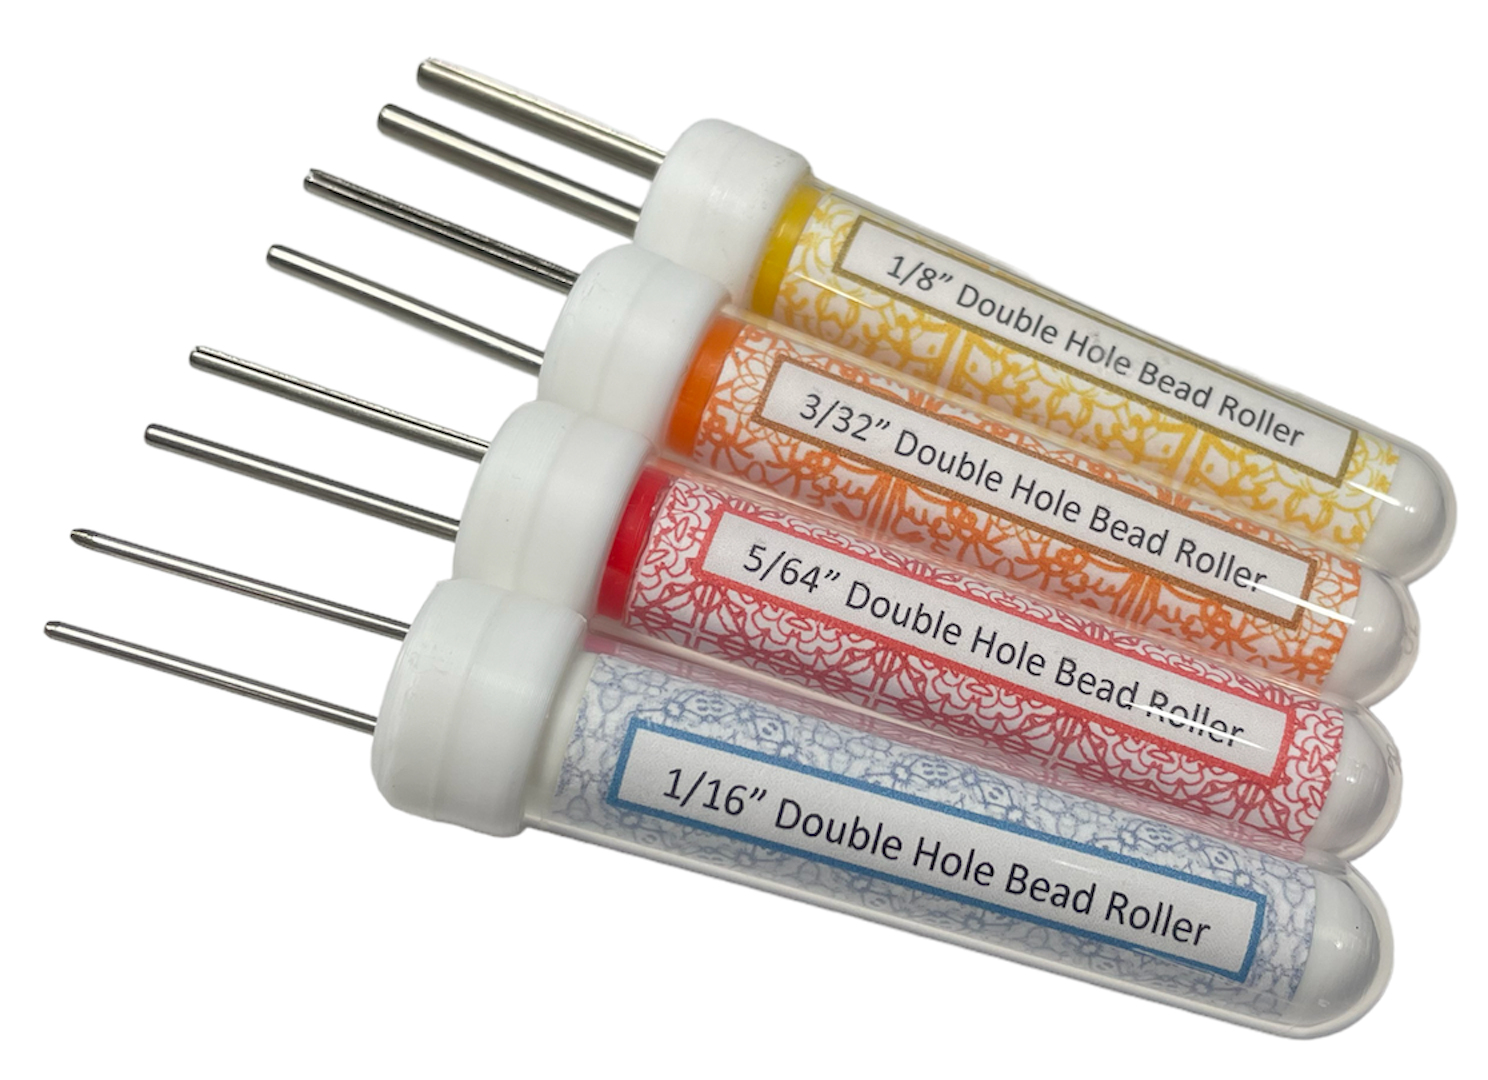 Set of 4 Double Hole Paper Bead Rollers